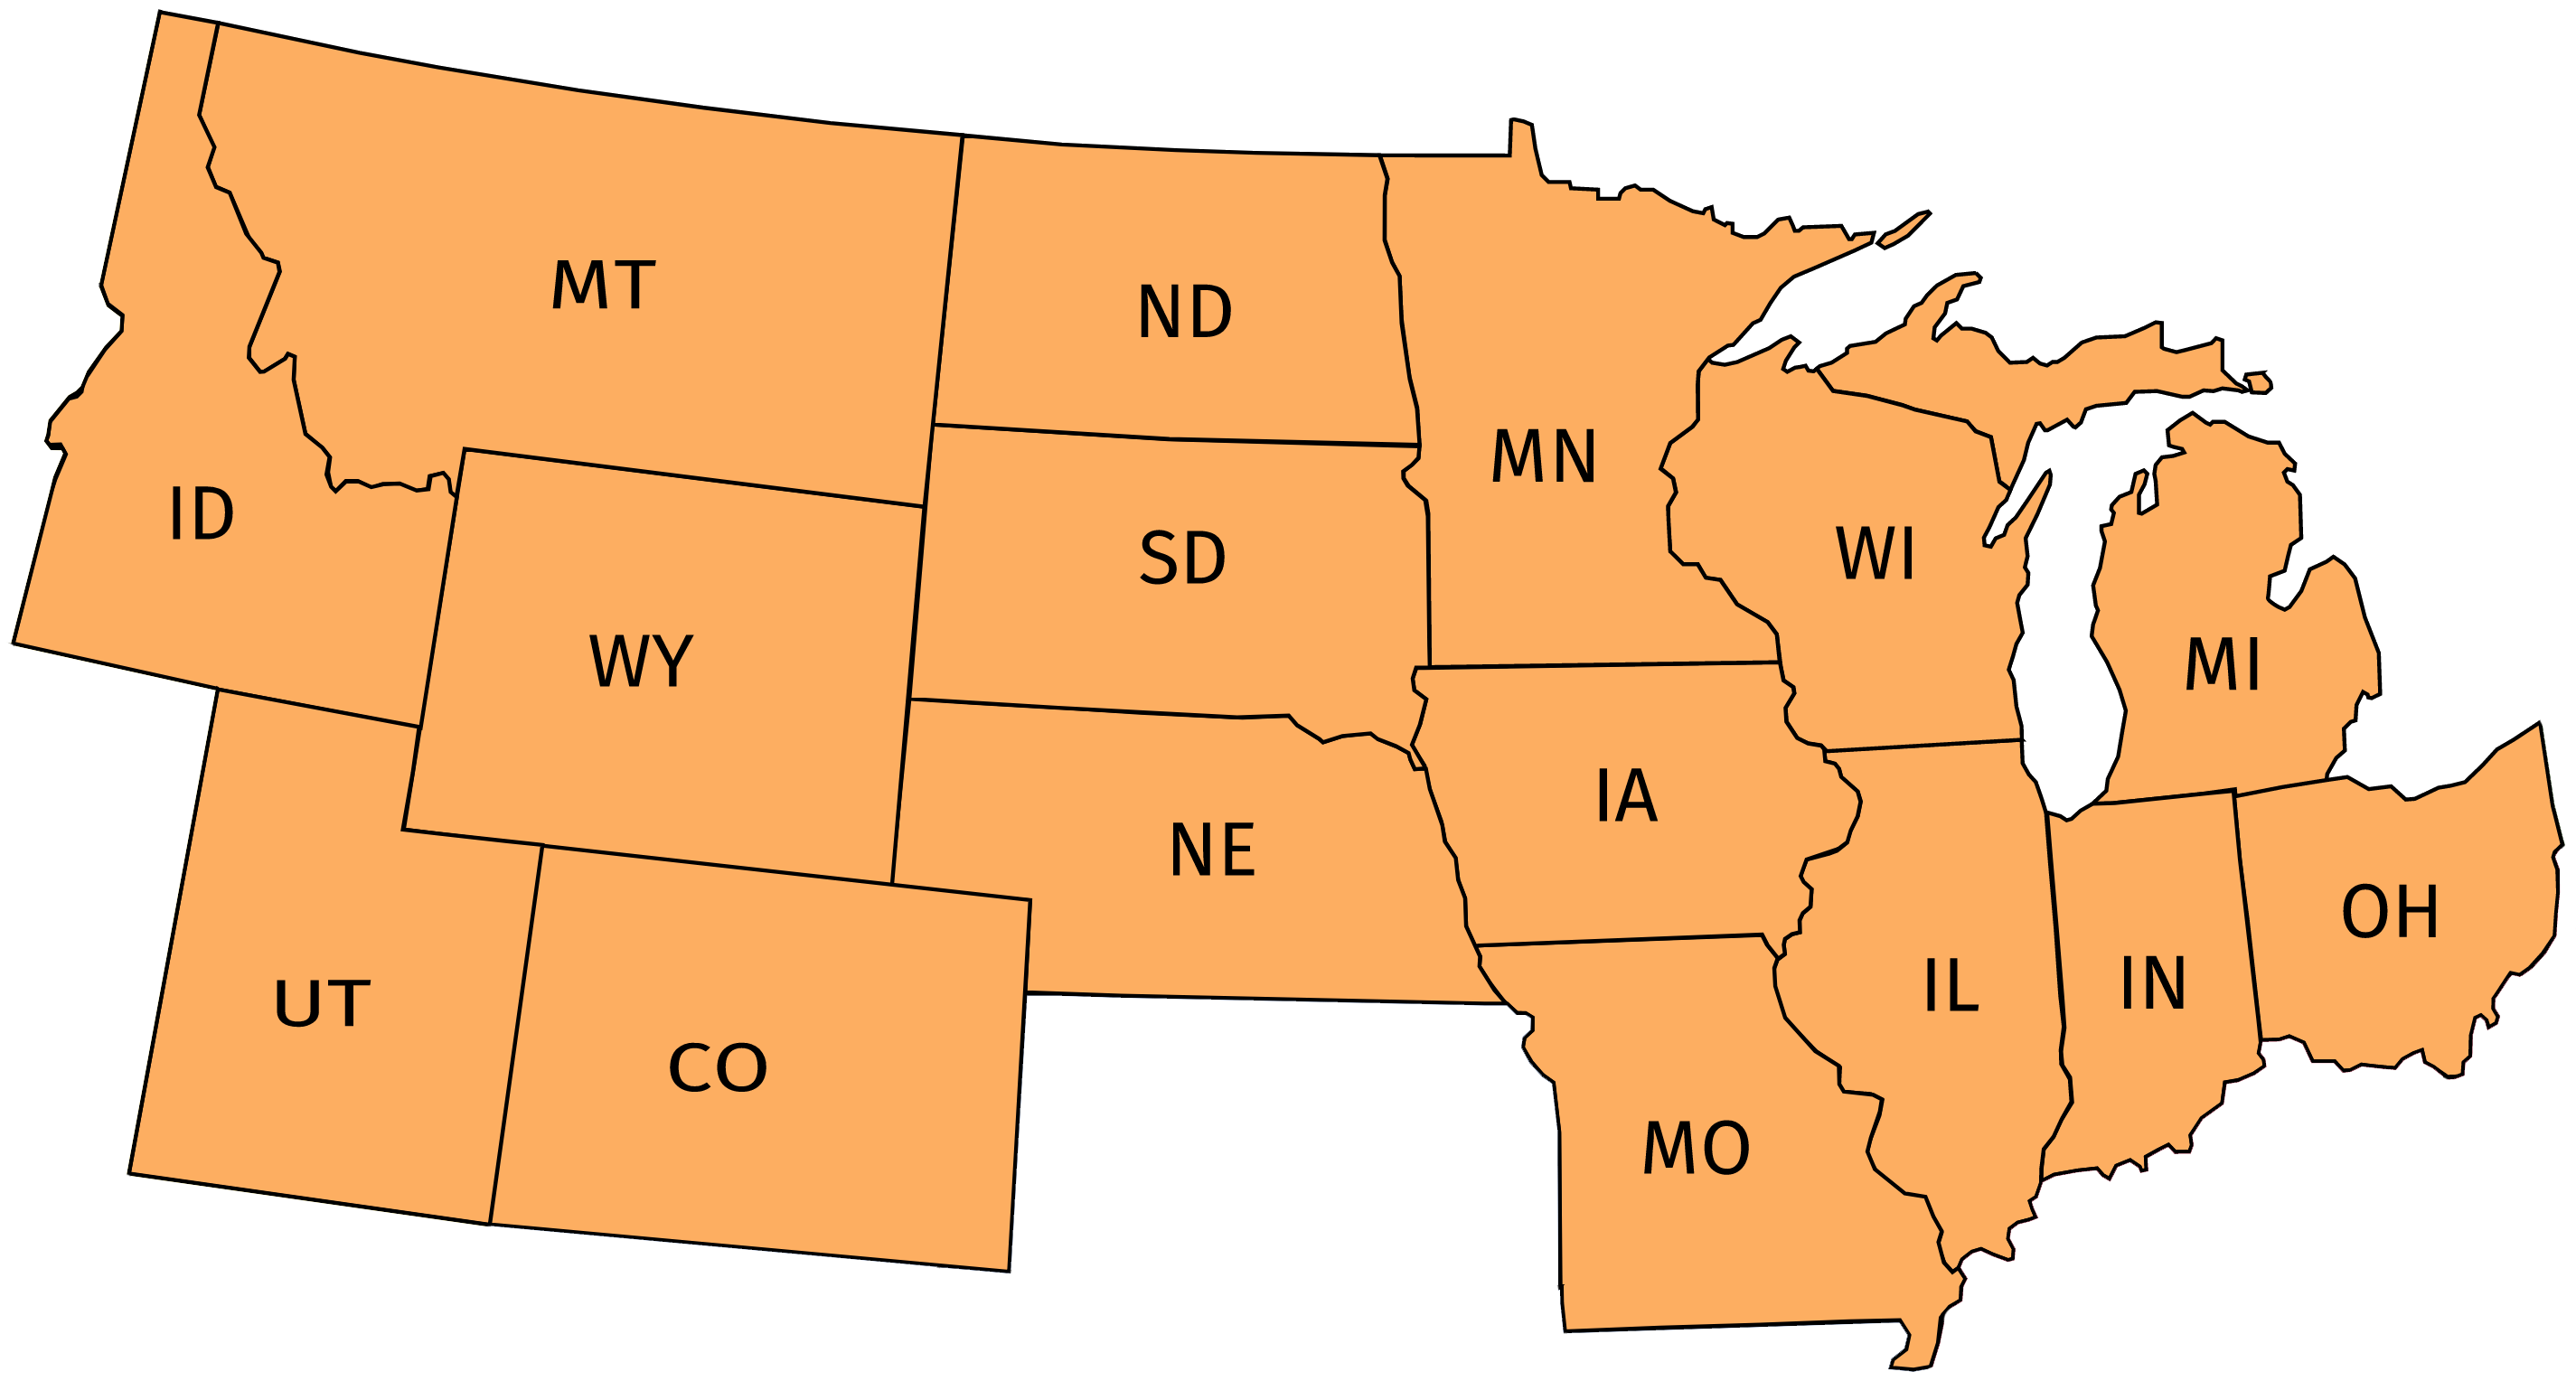 Midwestern Division map of ID, MT, WY, UT, CO, ND, SD, NE, MN, IA, MO, WI, IL, IN, MI, OH